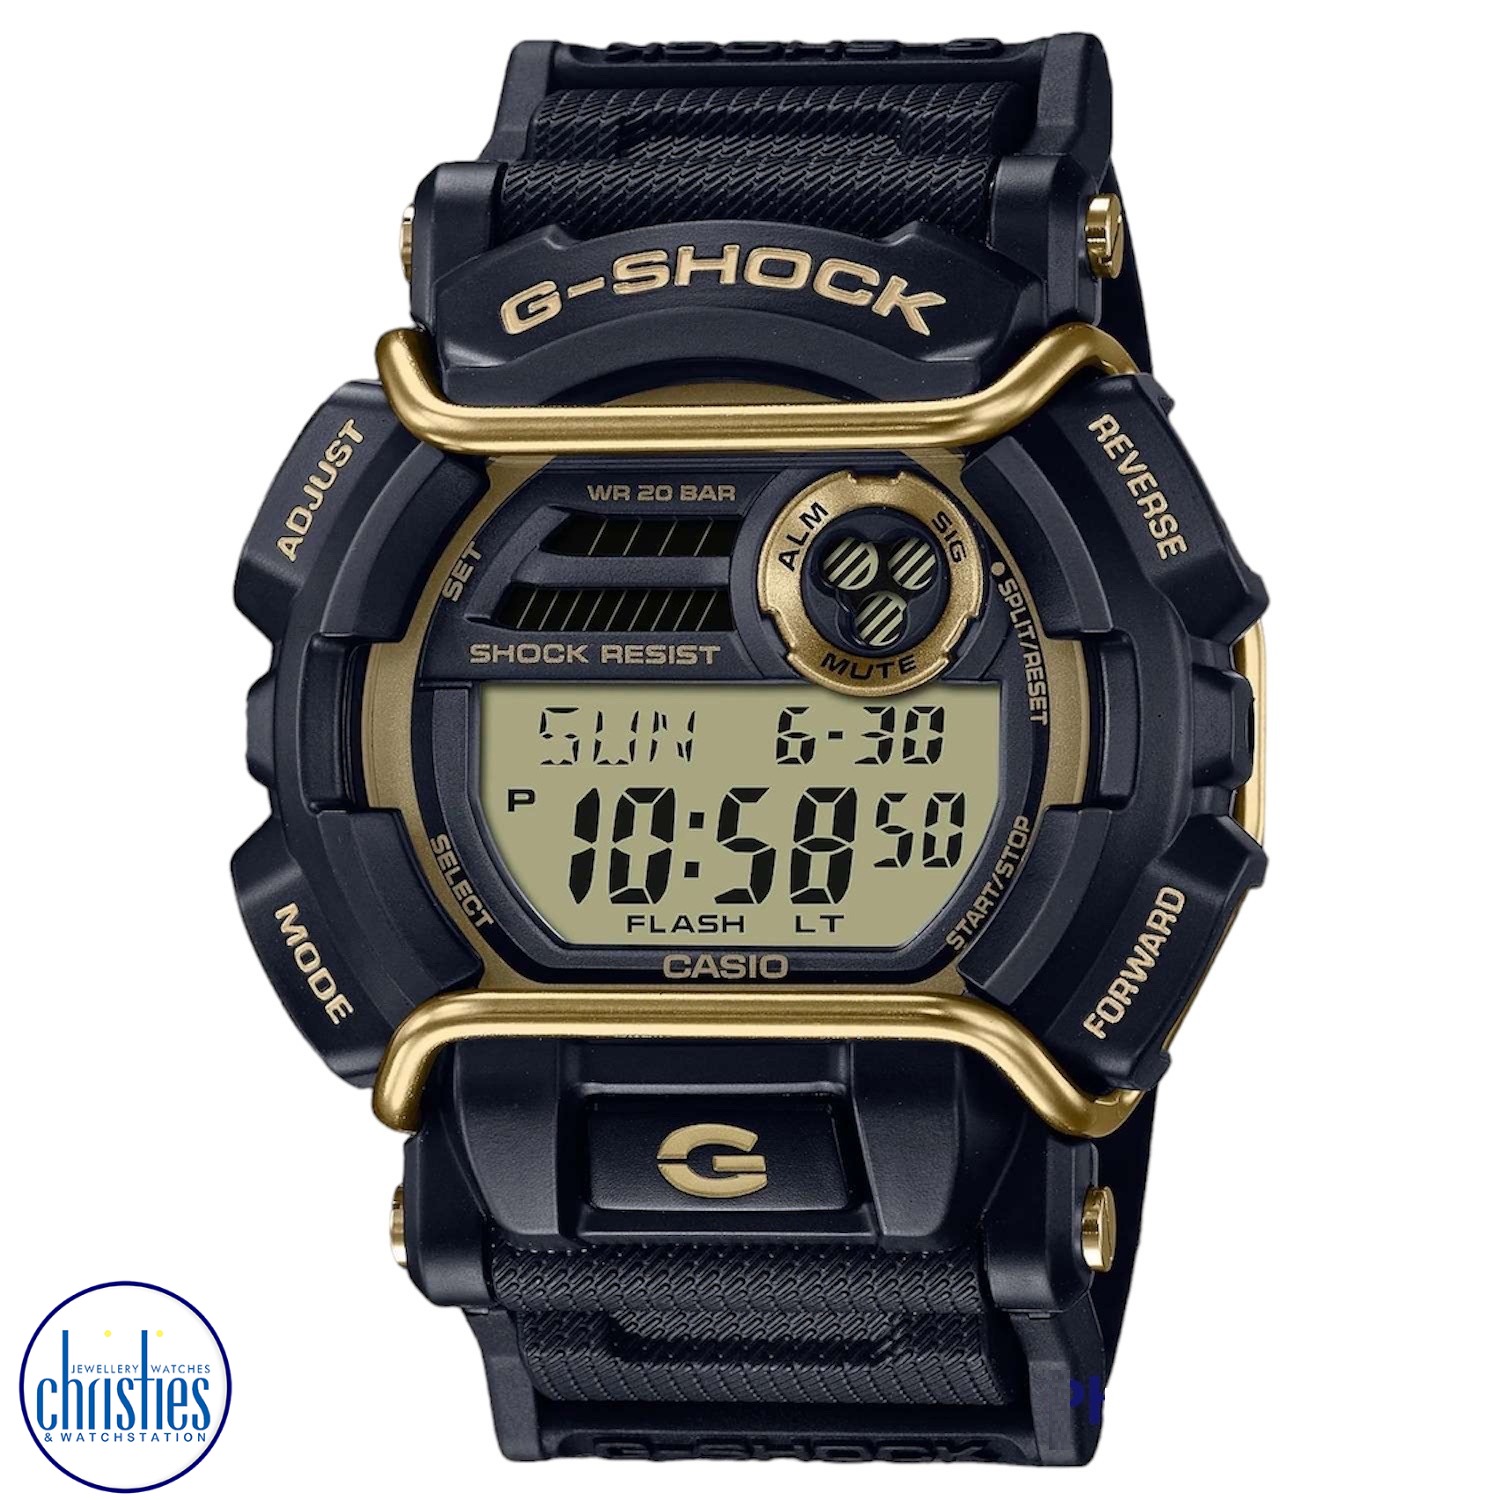 GD400GB-1B2 G-SHOCK Face Protectors Series. The GD400GB-1B2 is a sleek and stylish digital watch model from the renowned brand Casio.